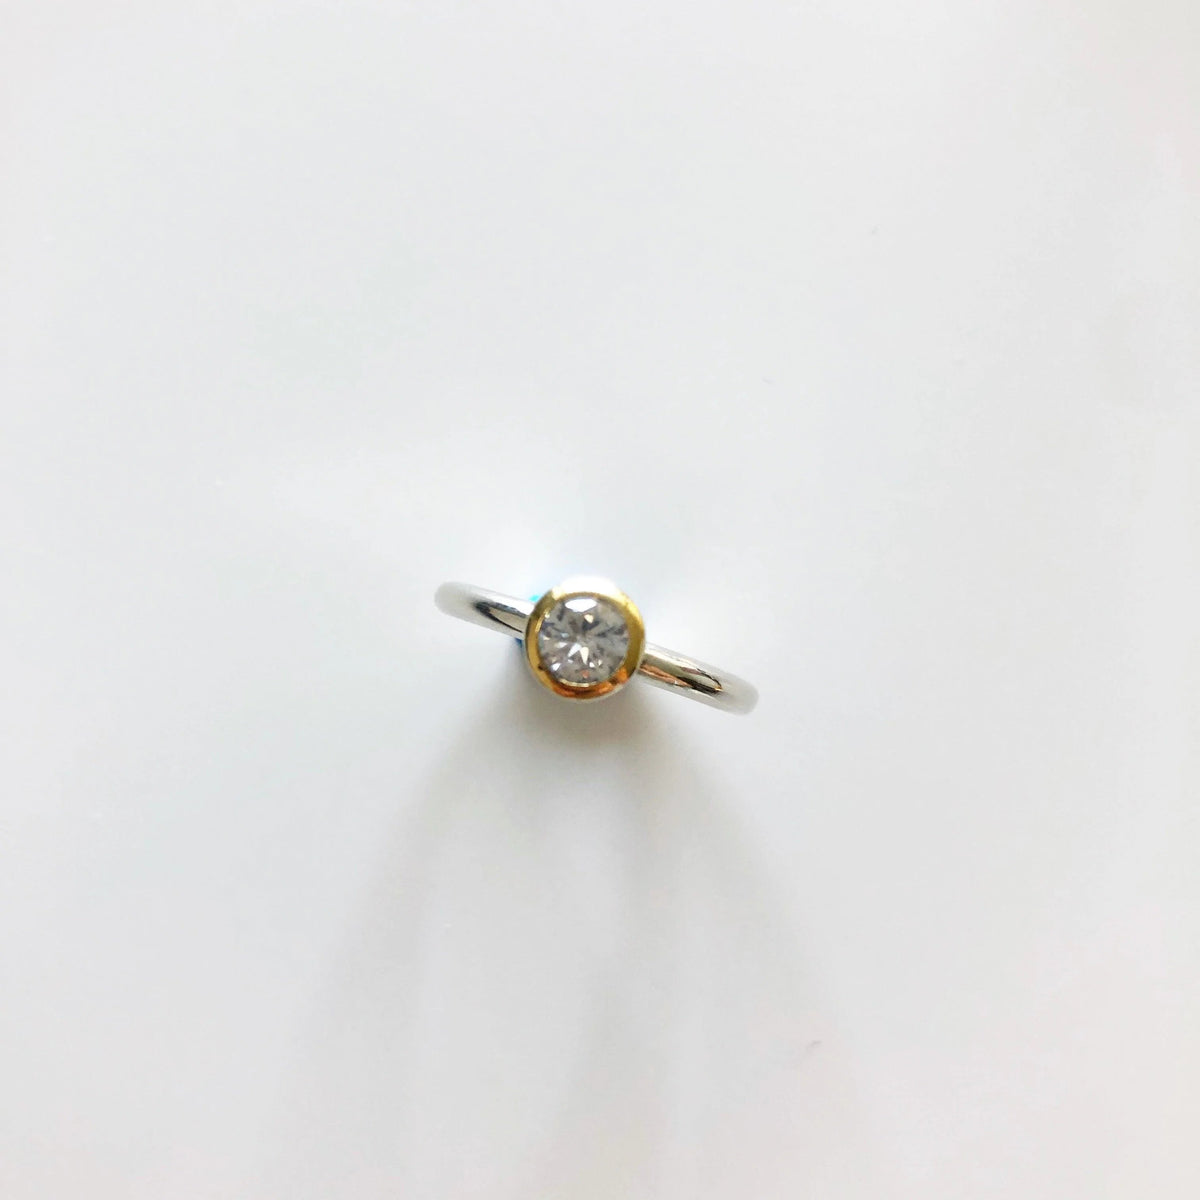 Handmade Sterling Silver Ring with AAA Cubic Zirconia in Gold and Silver